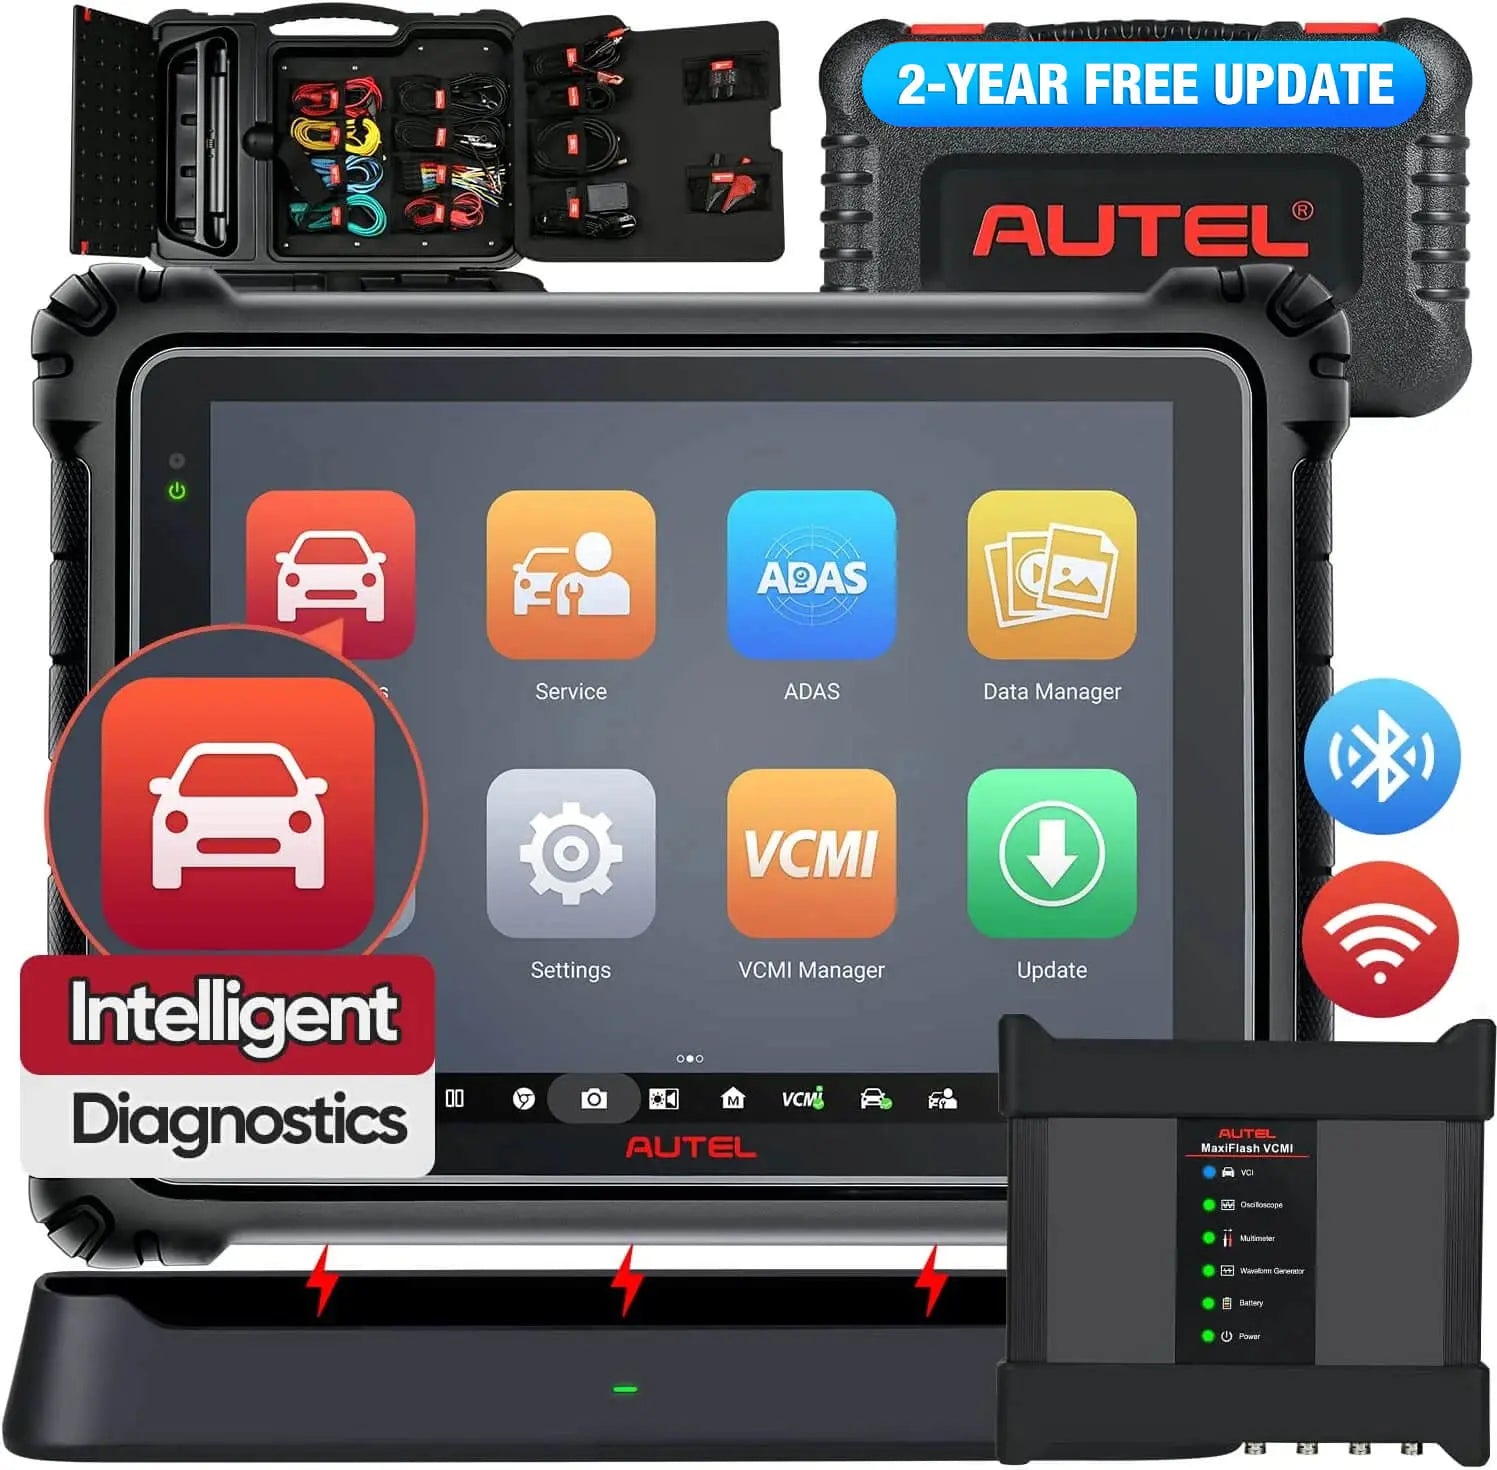 Autel Scanner MaxiSys Ultra, 2022 Top Car Intelligent Diagnostic Scan Tool, J-2534 ECU Programming & Coding, 5-in-1 VCMI, 40+ Services, Topology Map, Multi-Screen Display, Premium Ver. of MS909 MS919